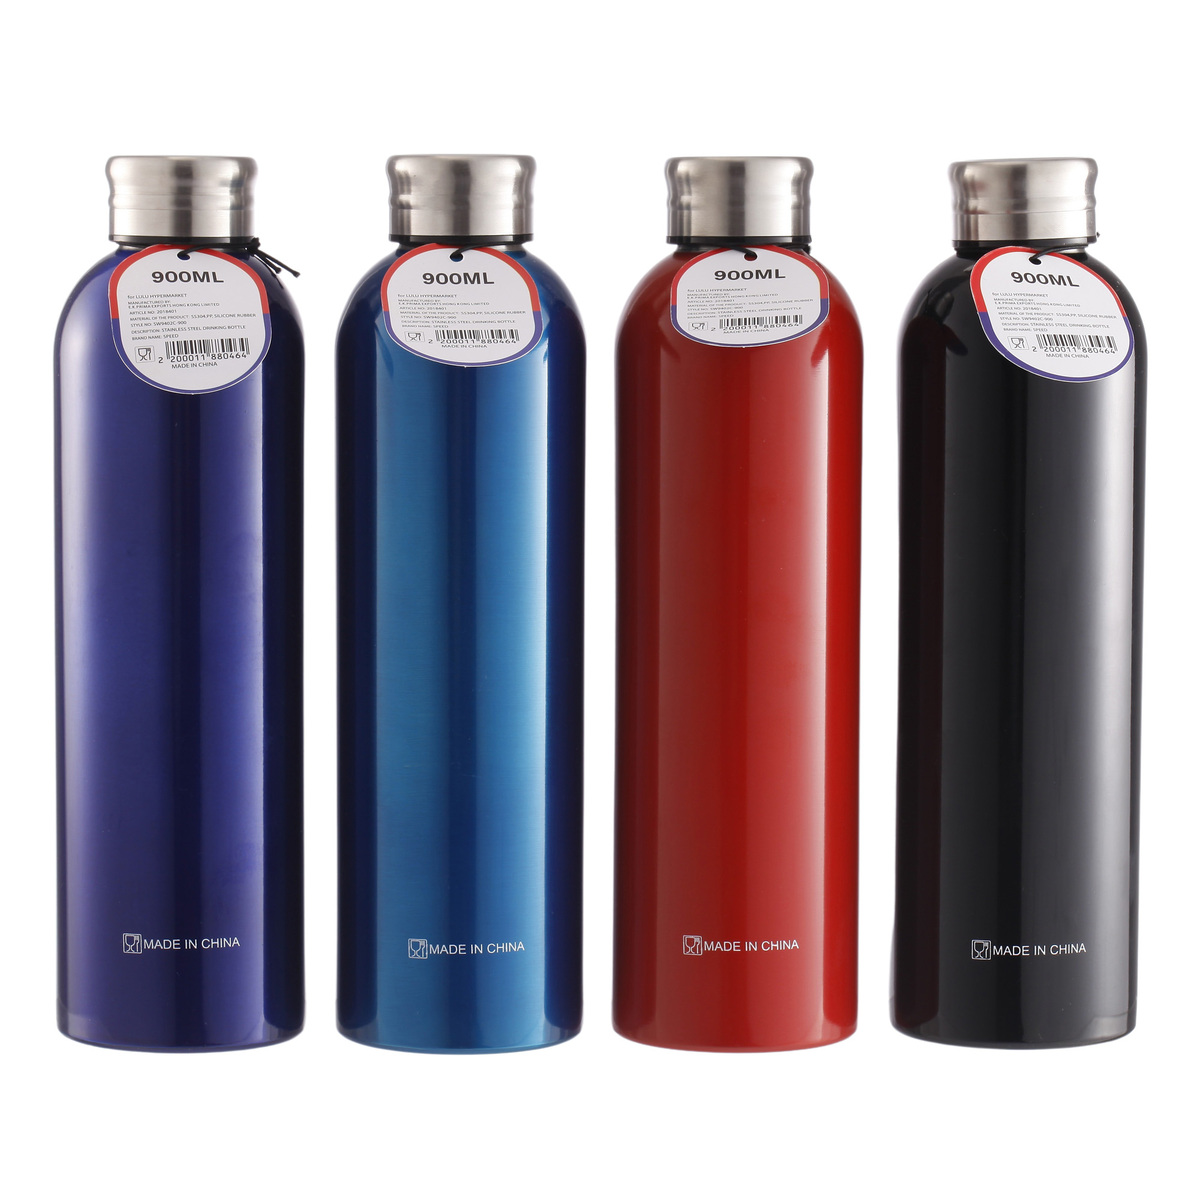 Speed Stainless Steel Drinking Bottle, 900 ml, Assorted Colors, 9402C